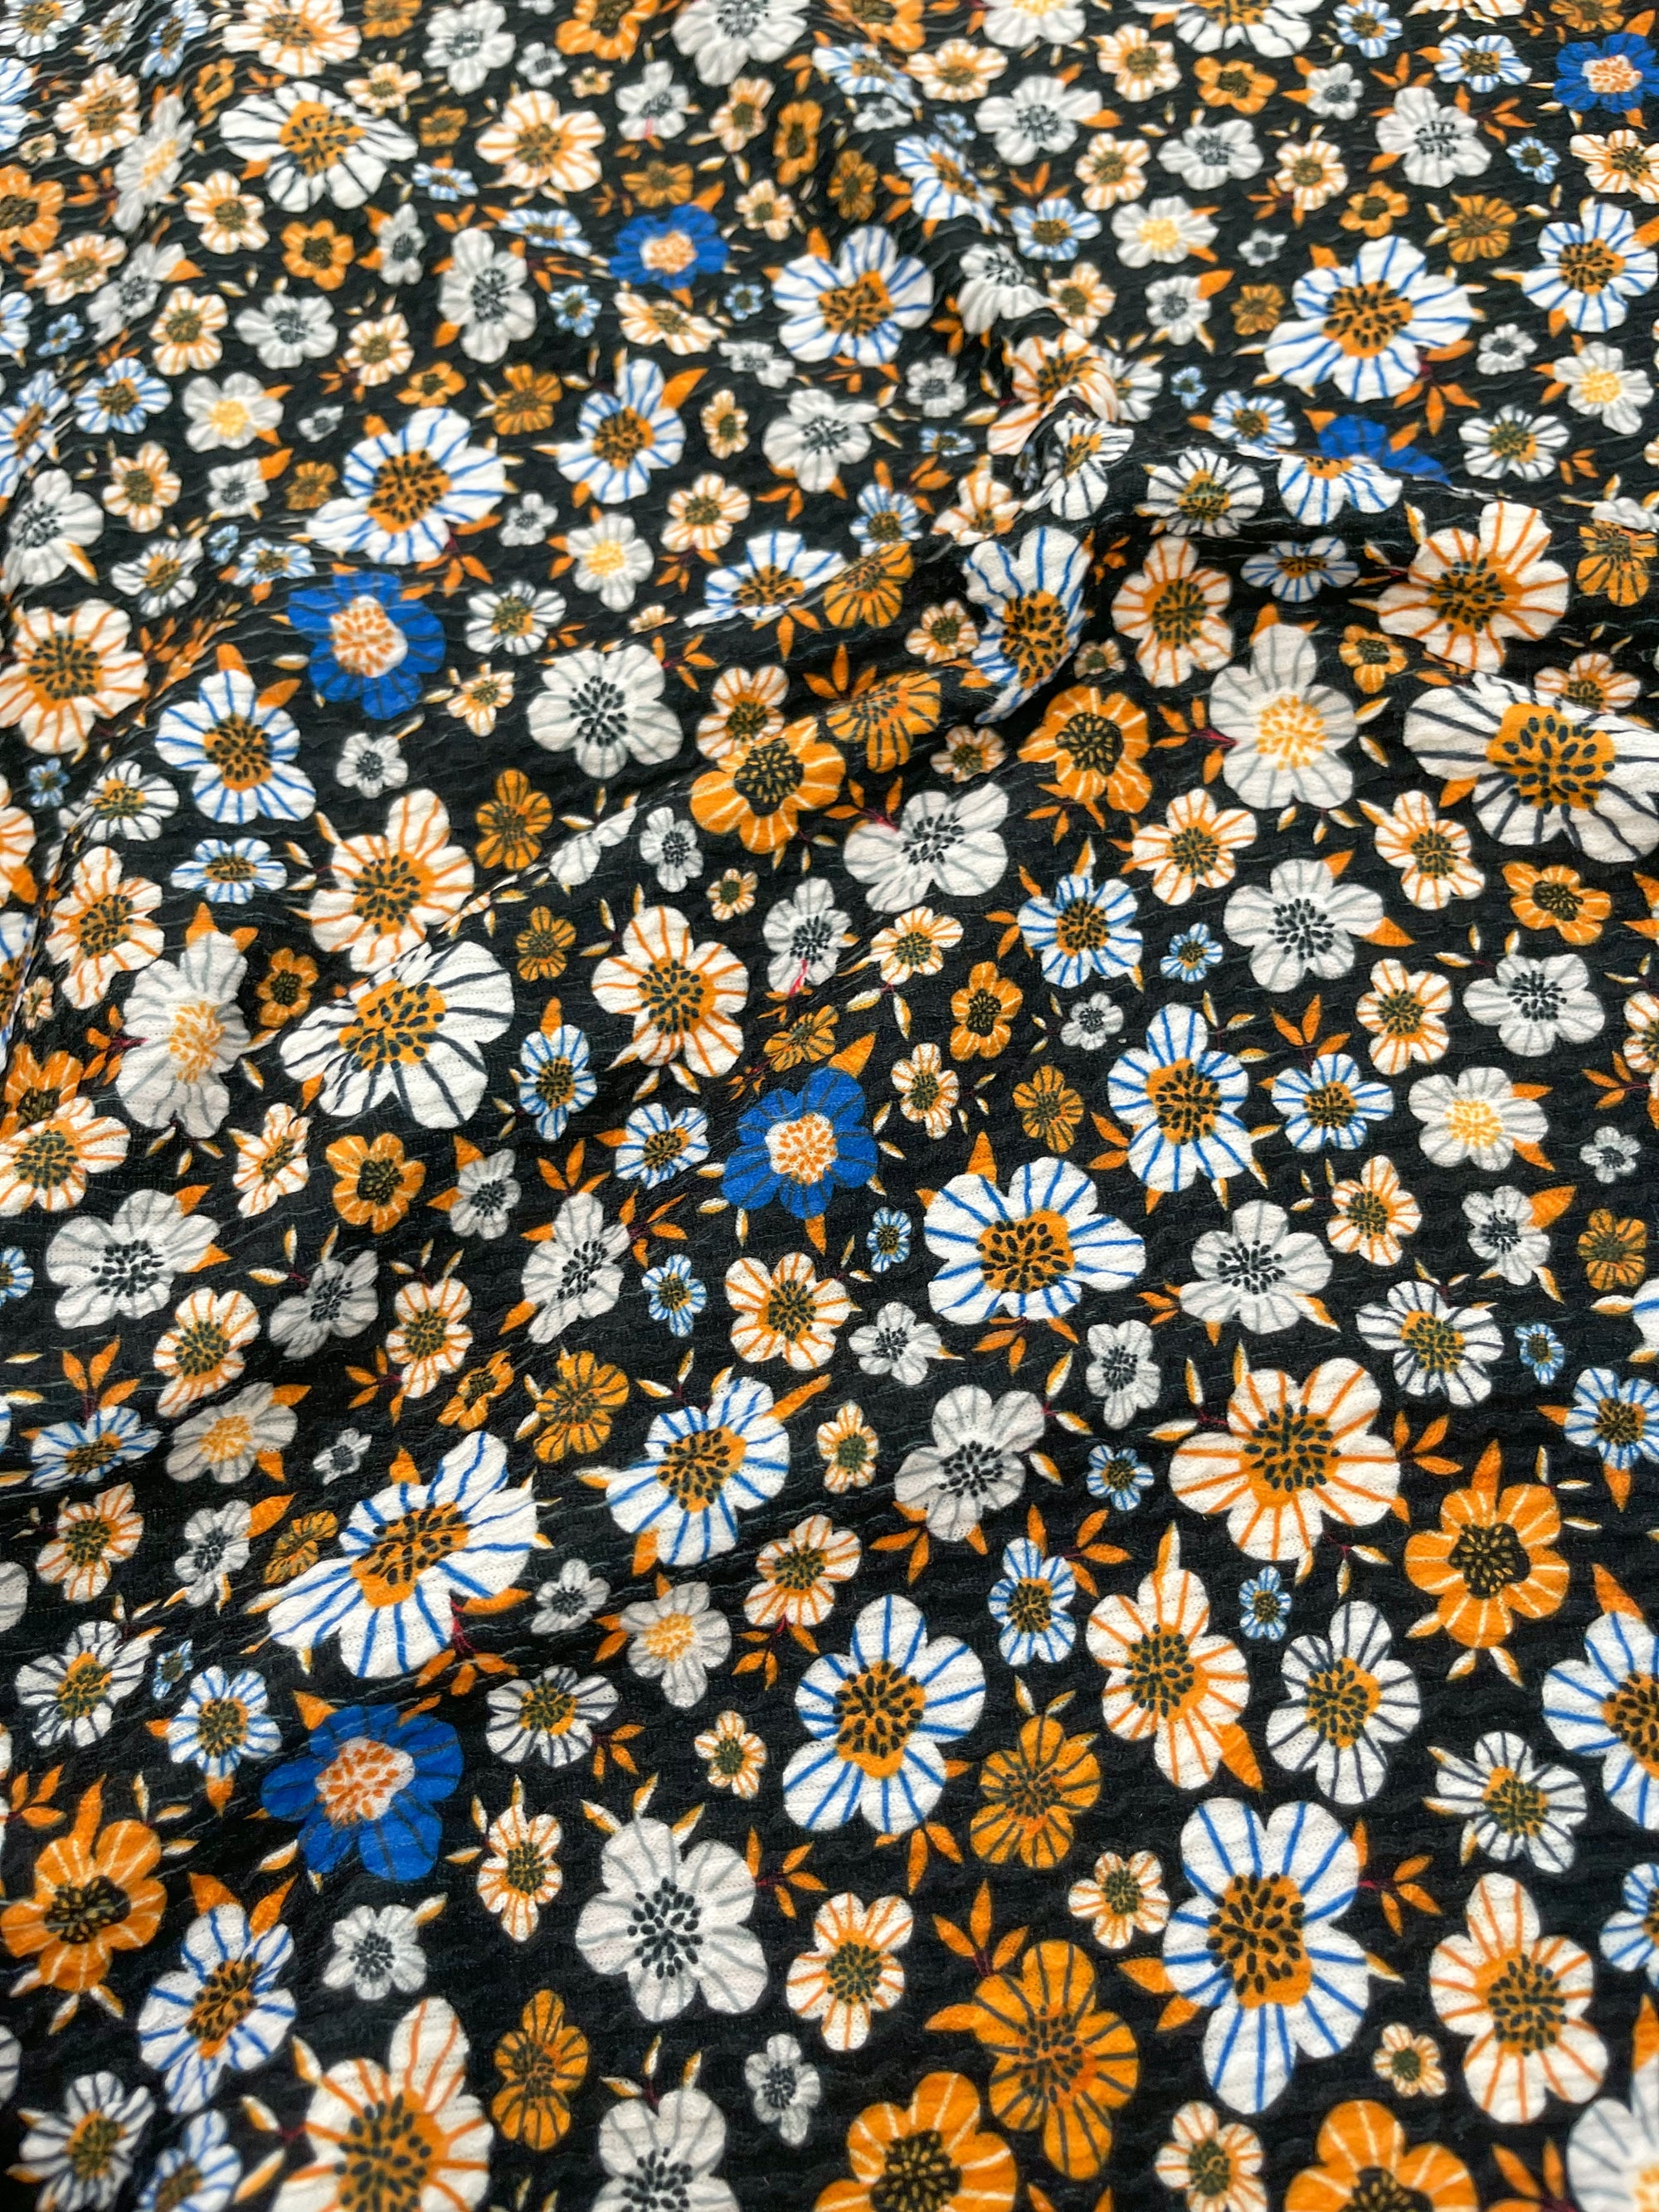 Blue and Black floral